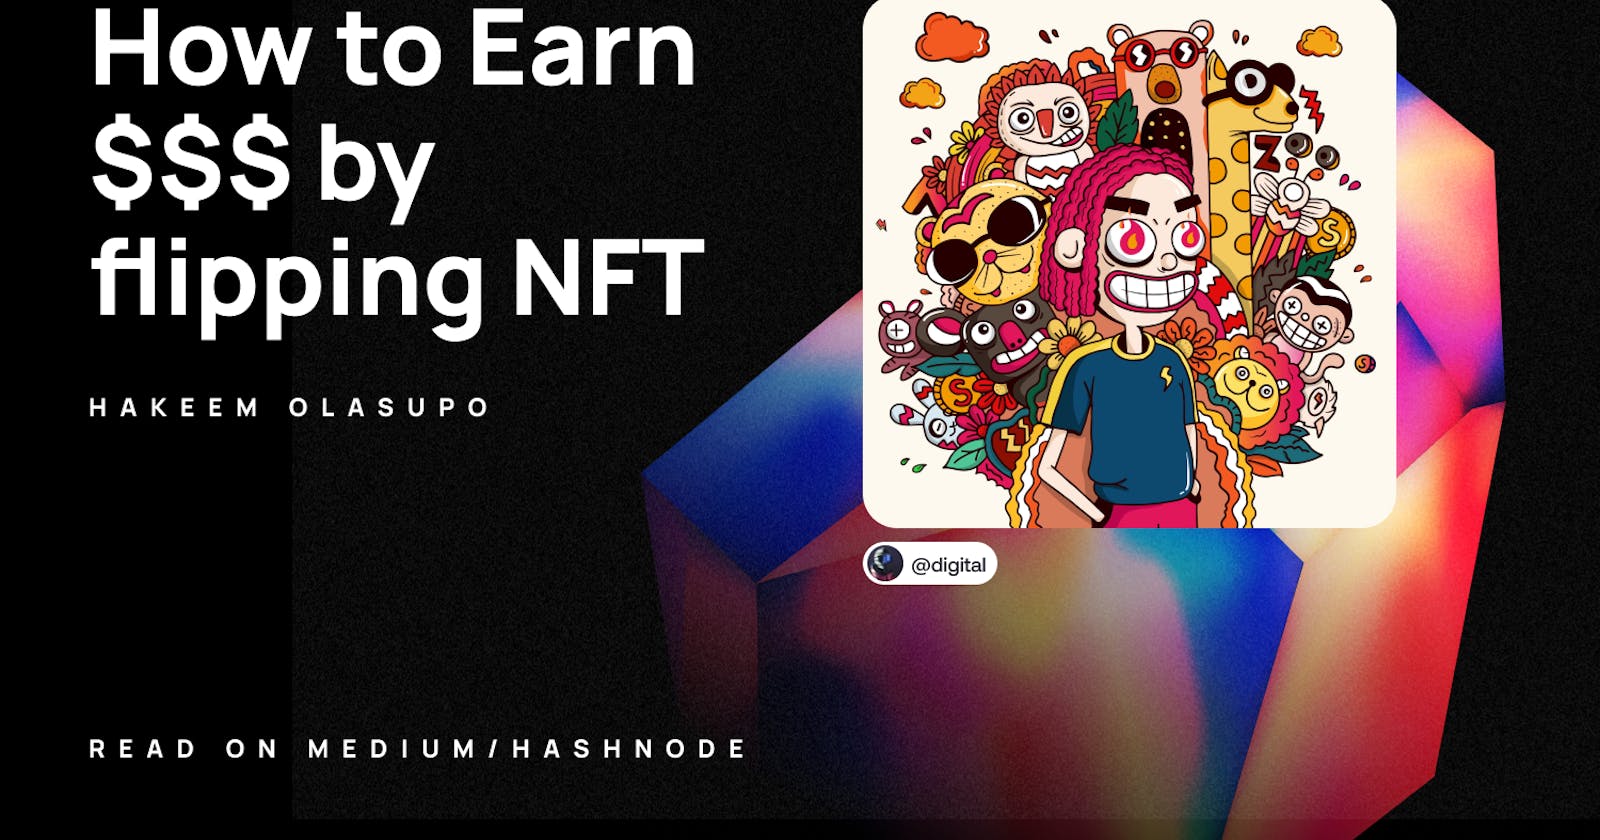 NFT Flipping: What is it and How to Make Money With It